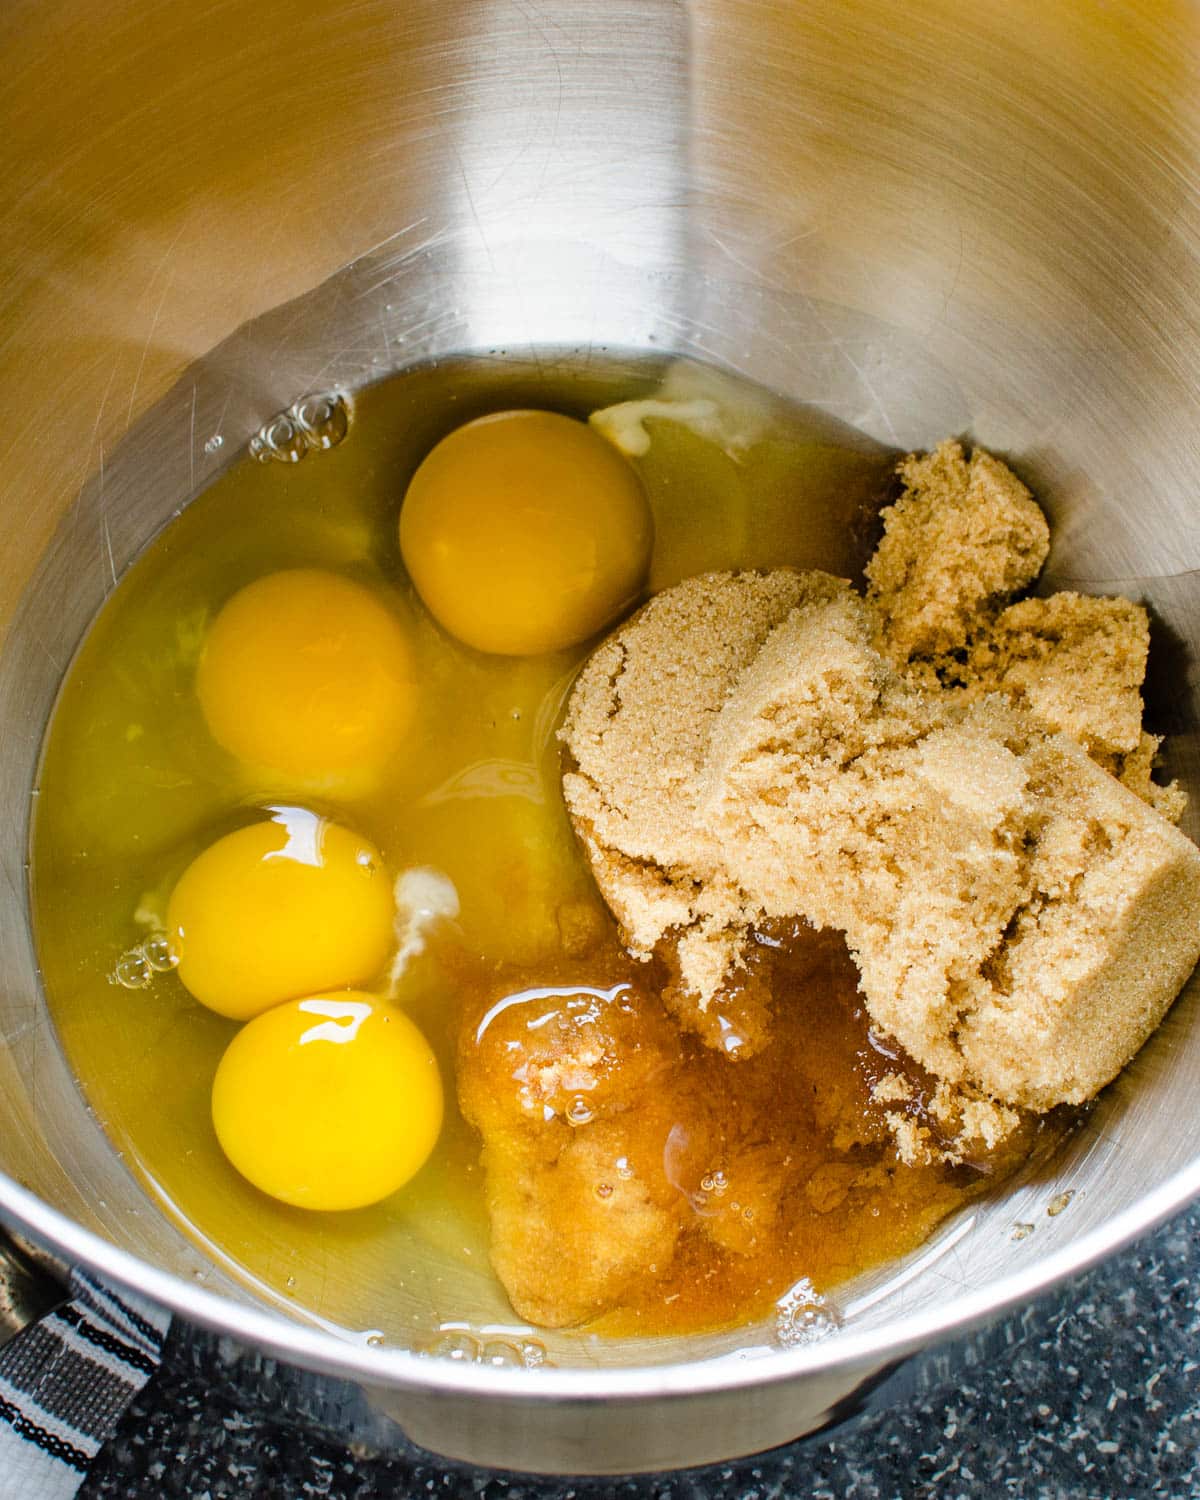 Combining the eggs and brown sugar. 